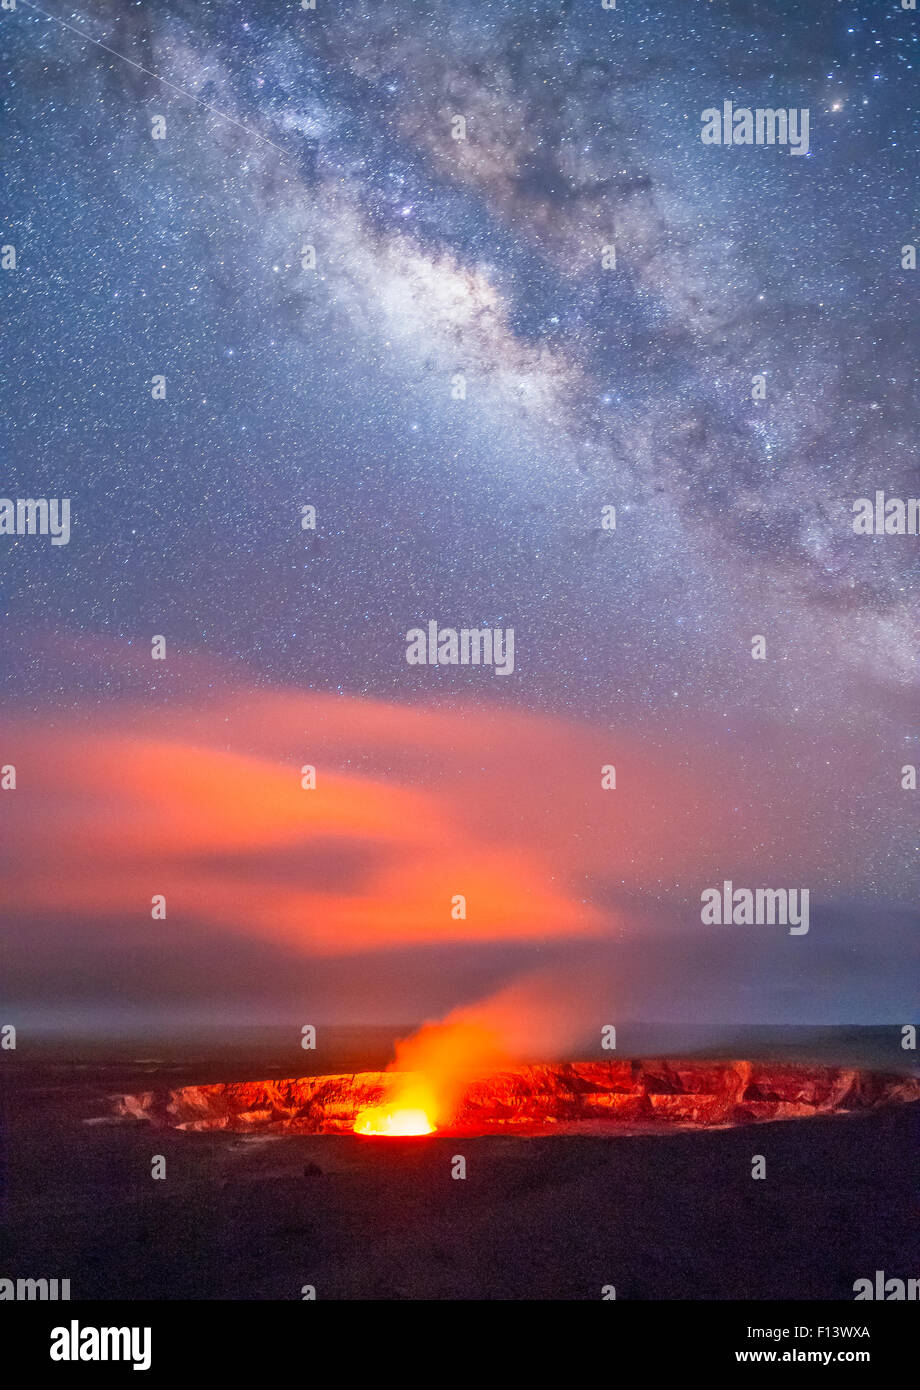 Glowing gases rising from Halemaumau Crater, Kilauea Caldera, in evening with Milky Way in the sky above.  Hawaii Volcanoes National Park, Hawaii, August 2010. Stock Photo